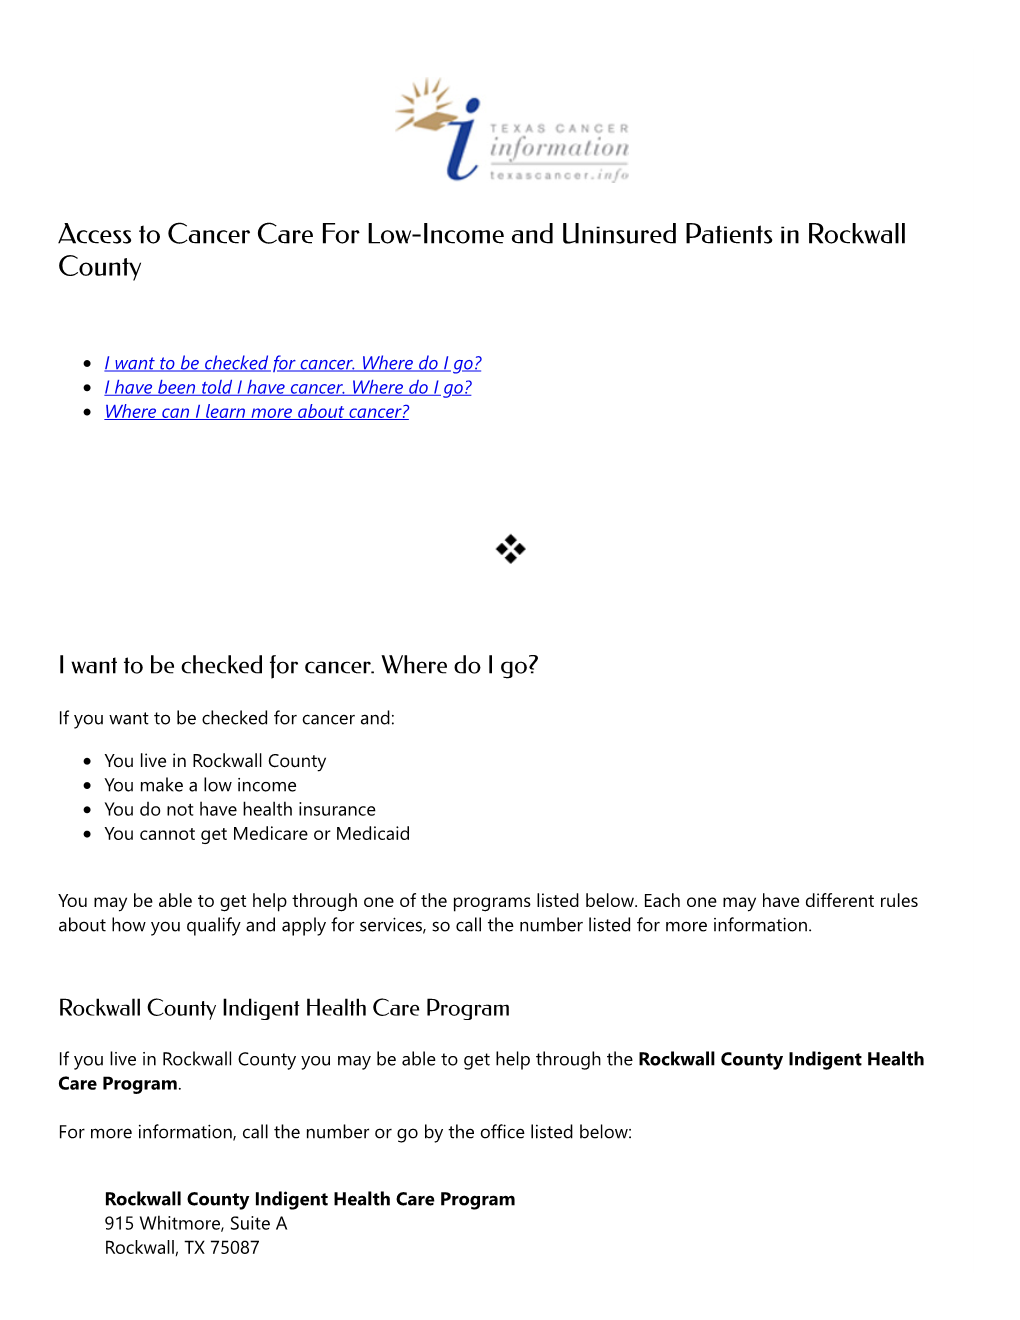 Access to Cancer Care for Low-Income and Uninsured Patients in Rockwall County